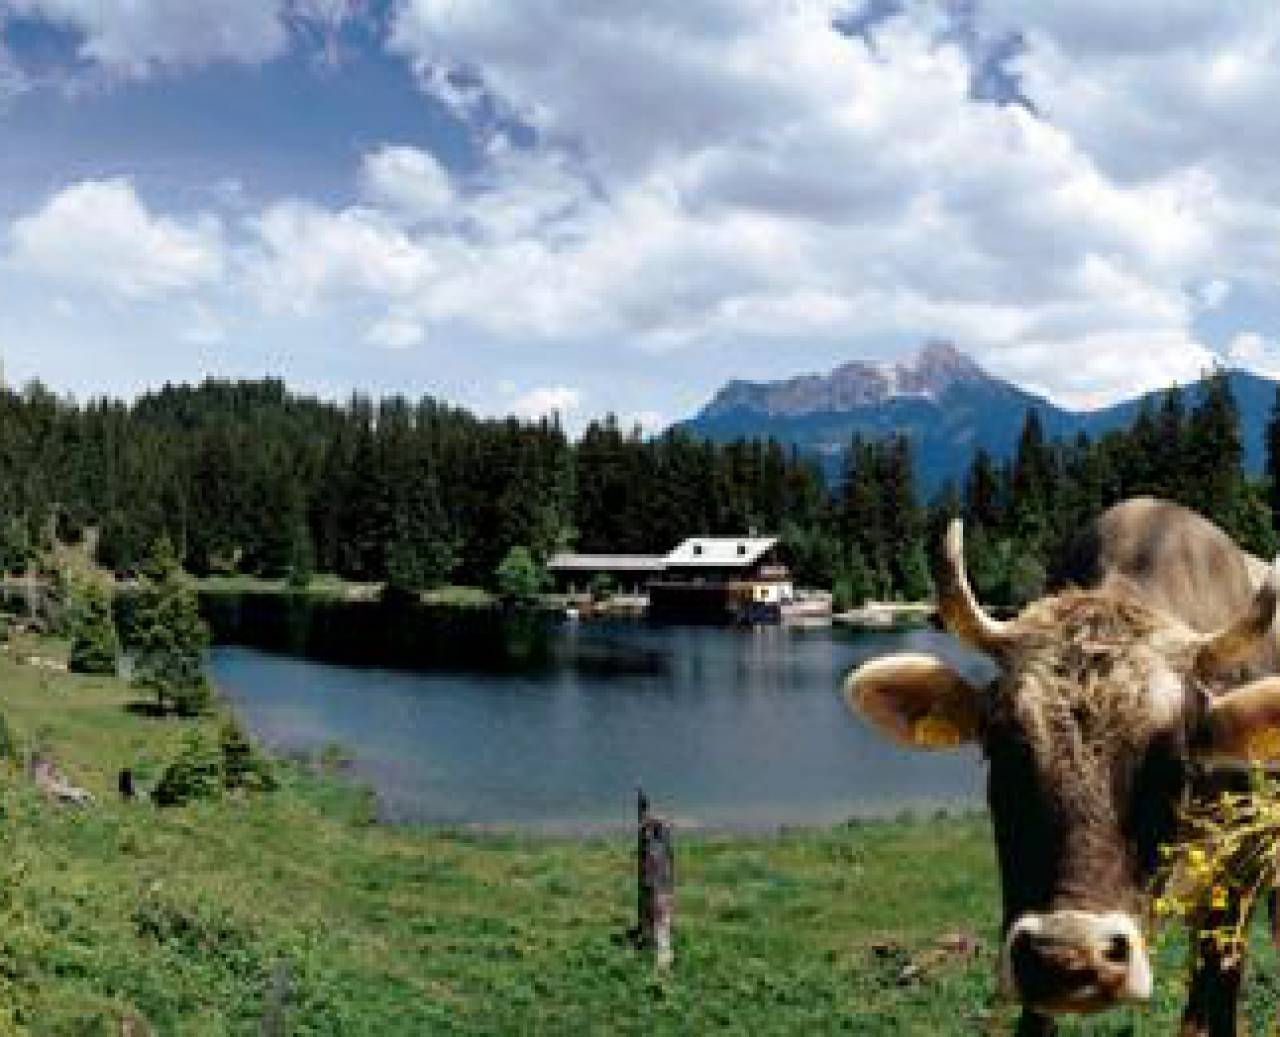 Woman feeding a cow on a meadow in front of a lake in SOmmer